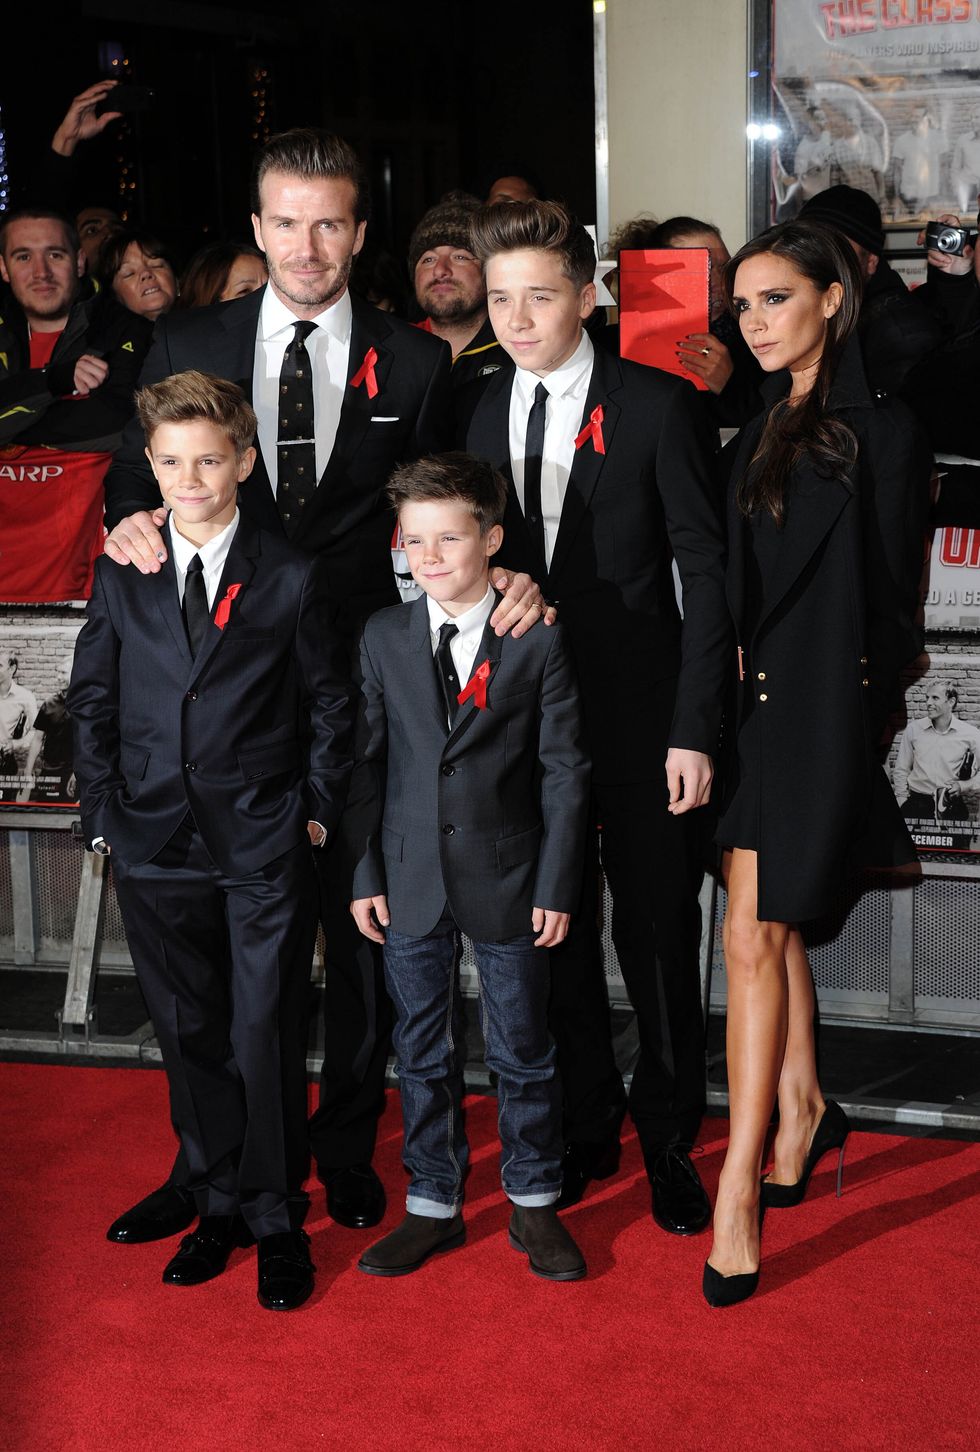 david and victoria bechkam with their sons Brooklyn, Romeo, and Cruz